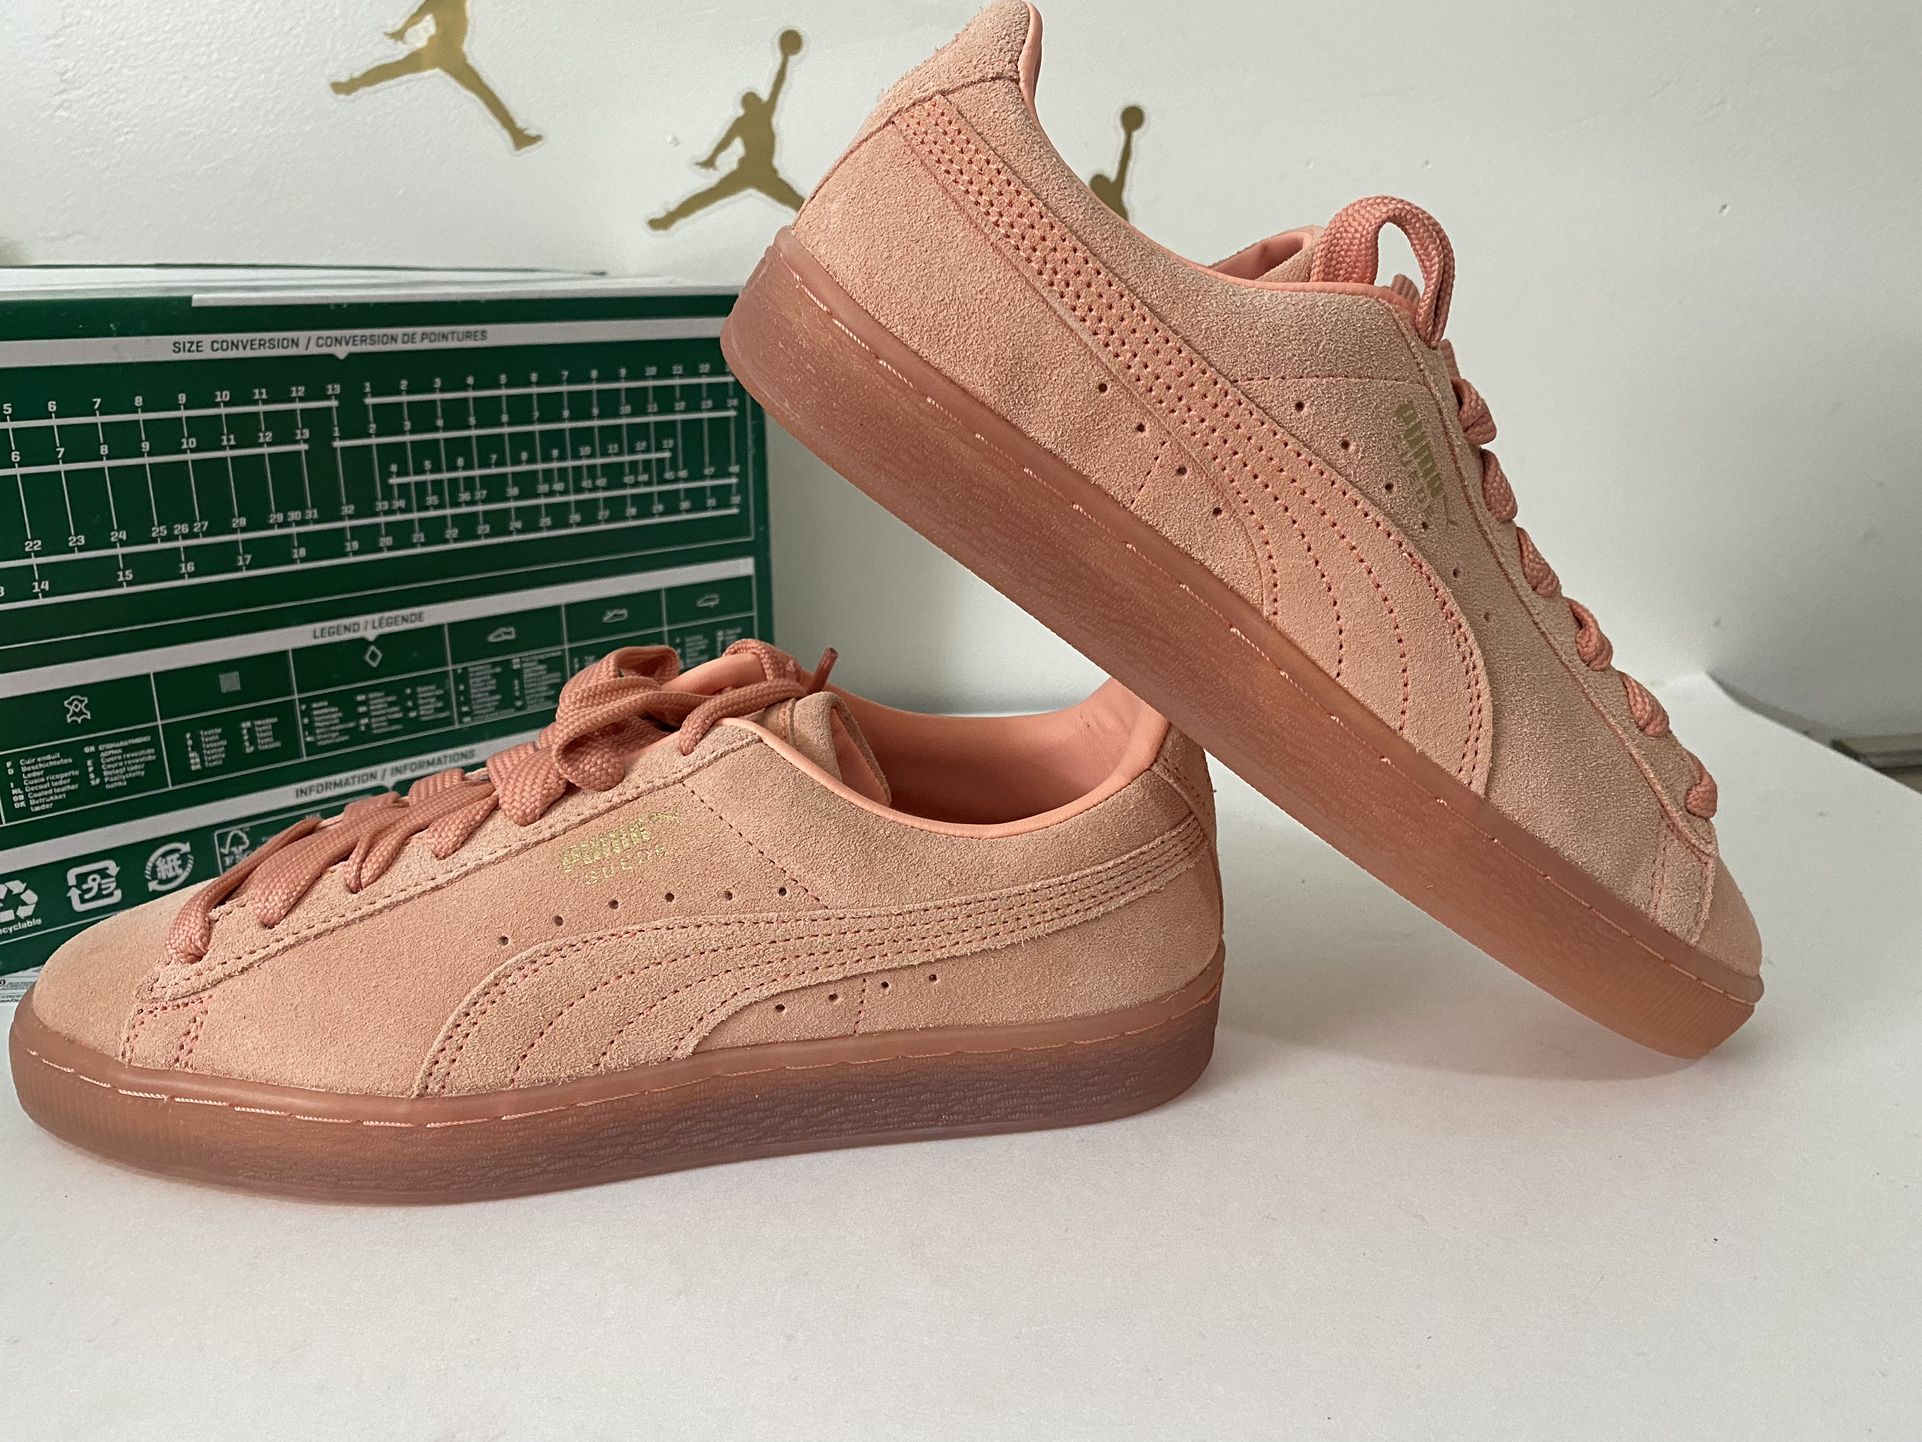 Puma Suede Classic ( Pick Up Only ) Size 7y-Today Only- Price Firm